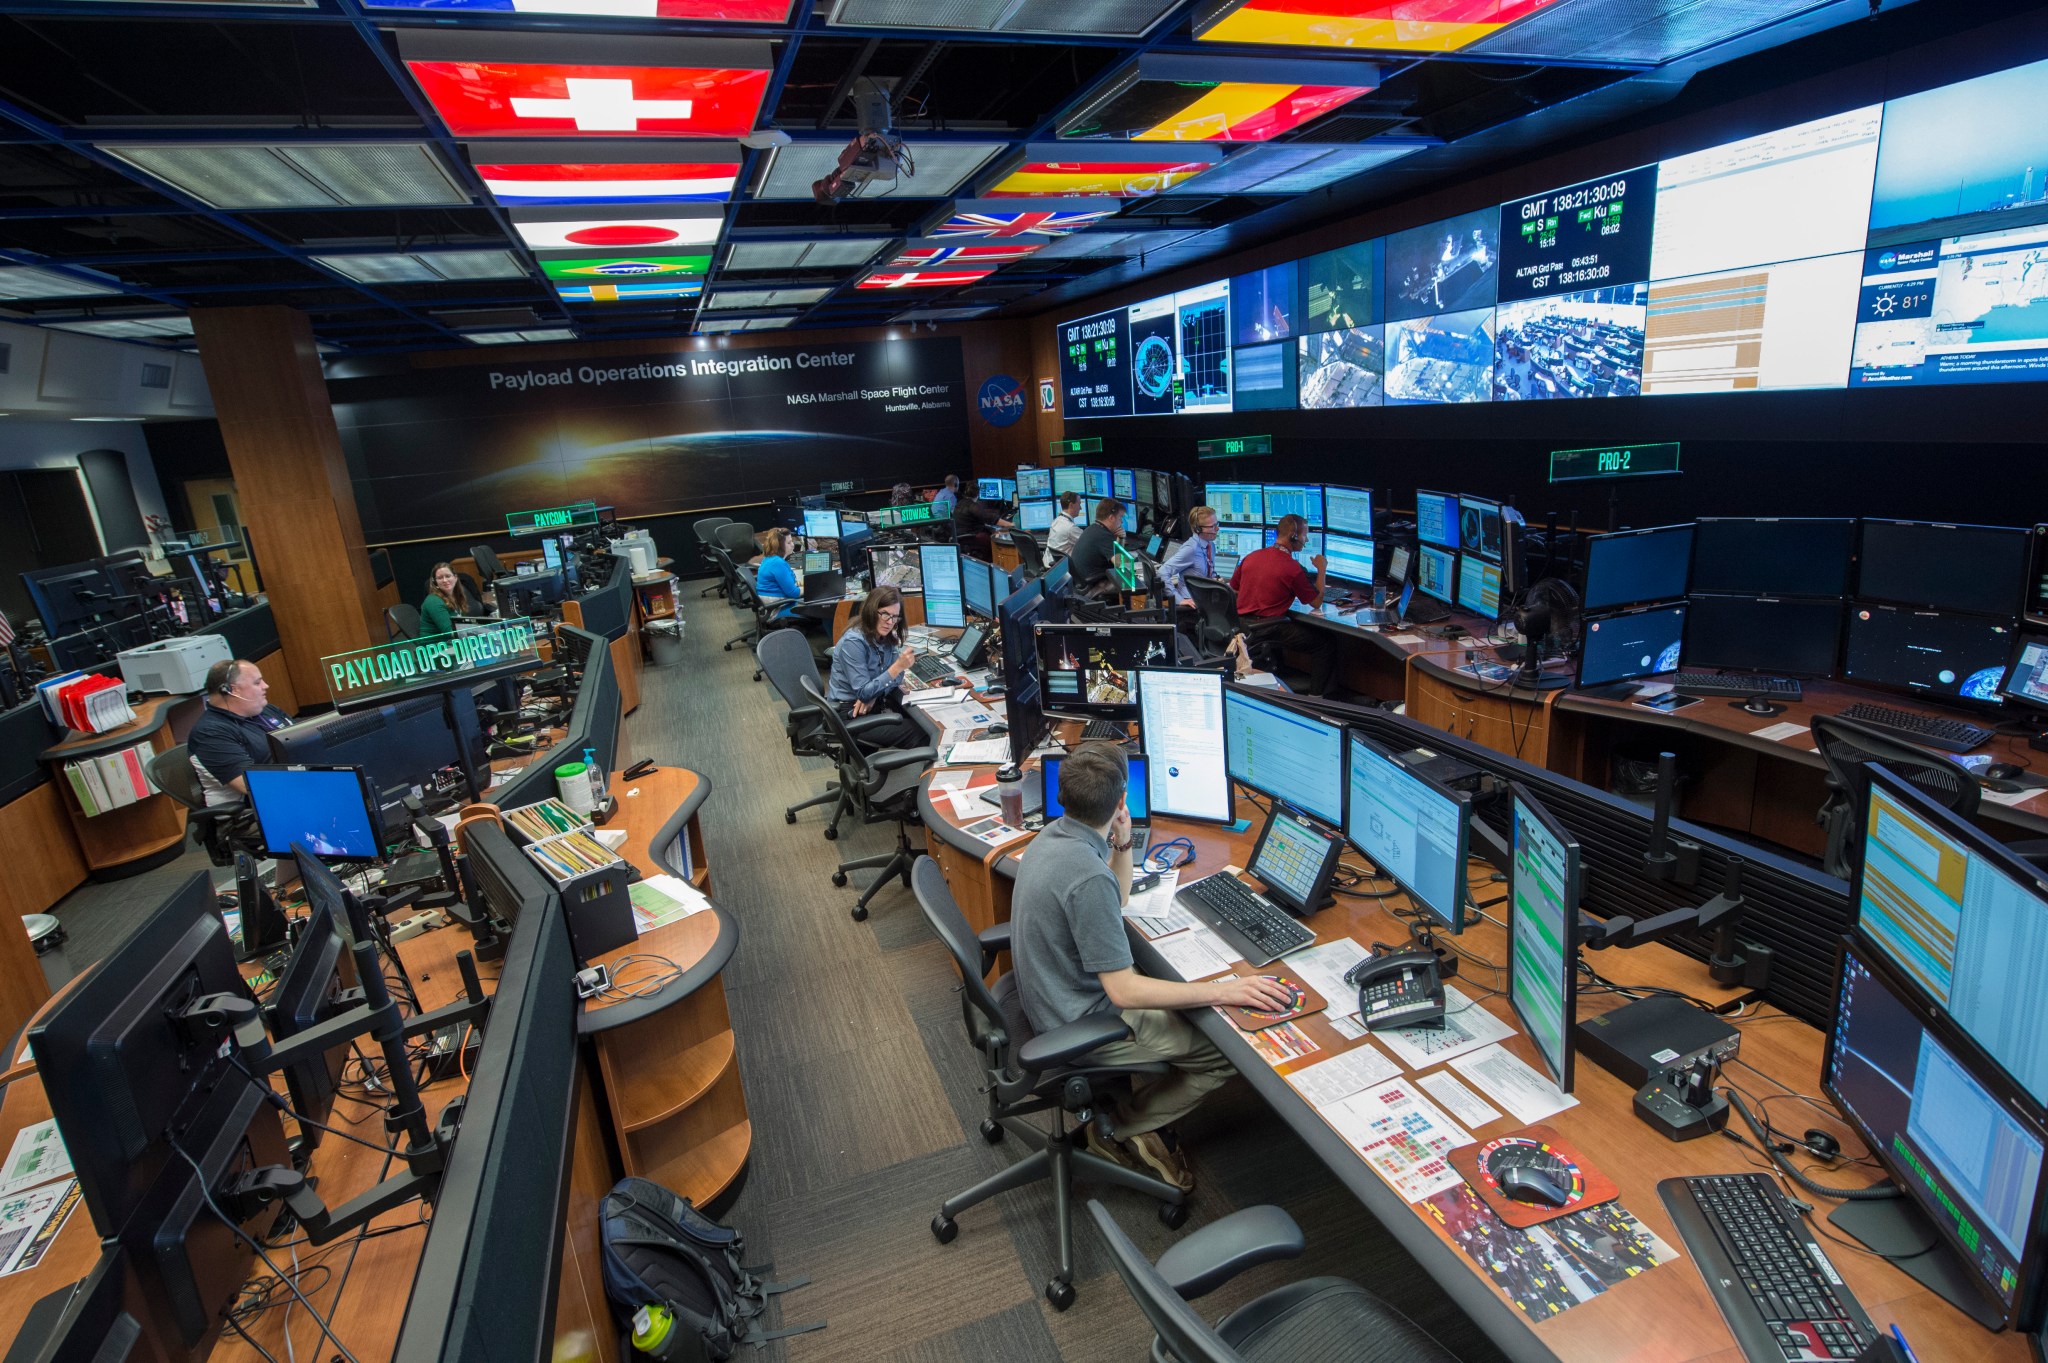 The Payload Operations Integration Center instituted a new high-tempo operations workflow April 24. 